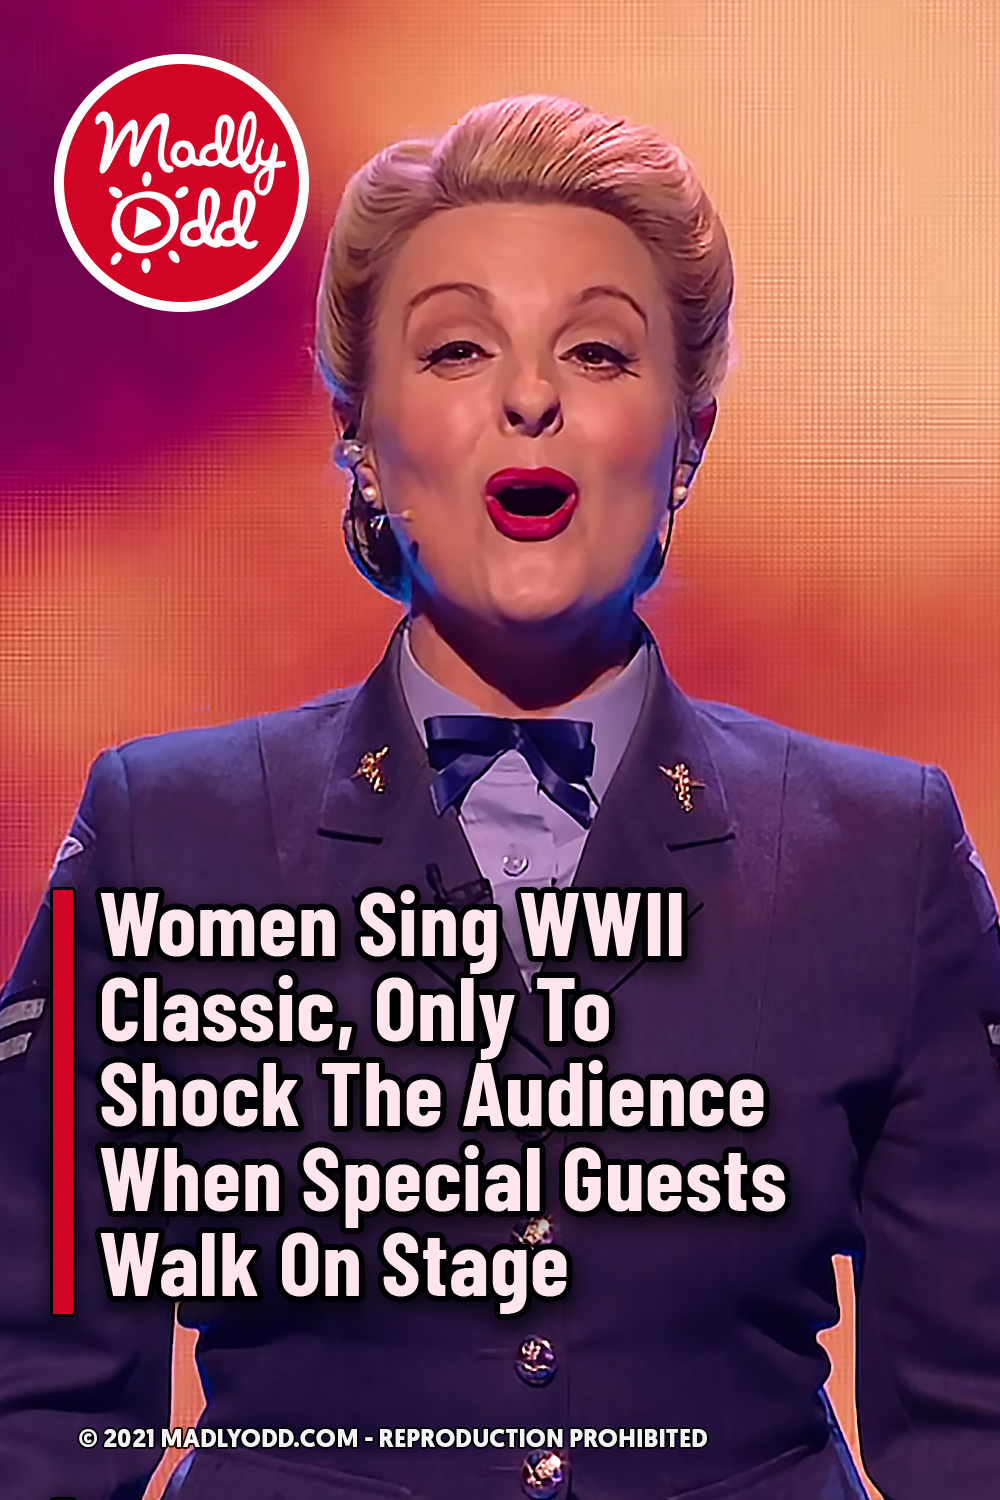 Women Sing WWII Classic, Only To Shock The Audience When Special Guests Walk On Stage